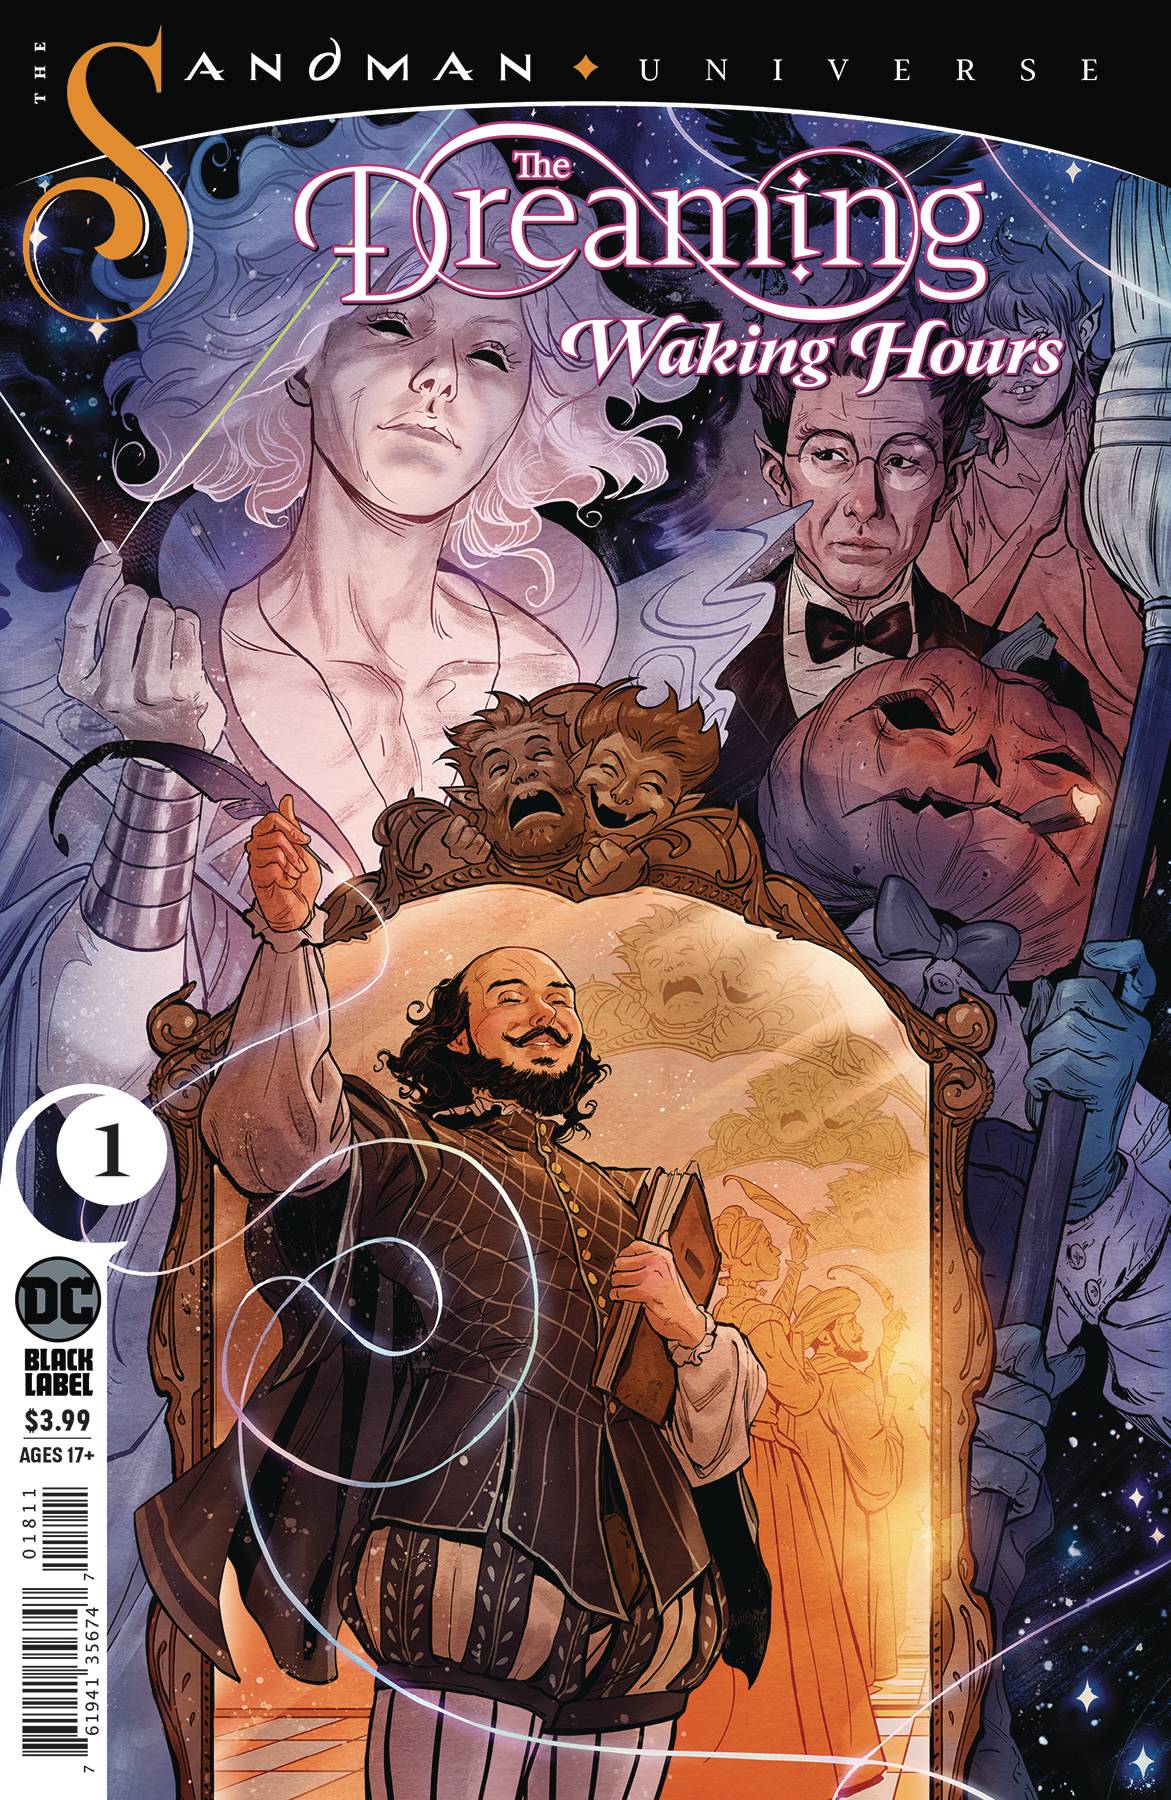 DREAMING WAKING HOURS #1 (RES) (MR)